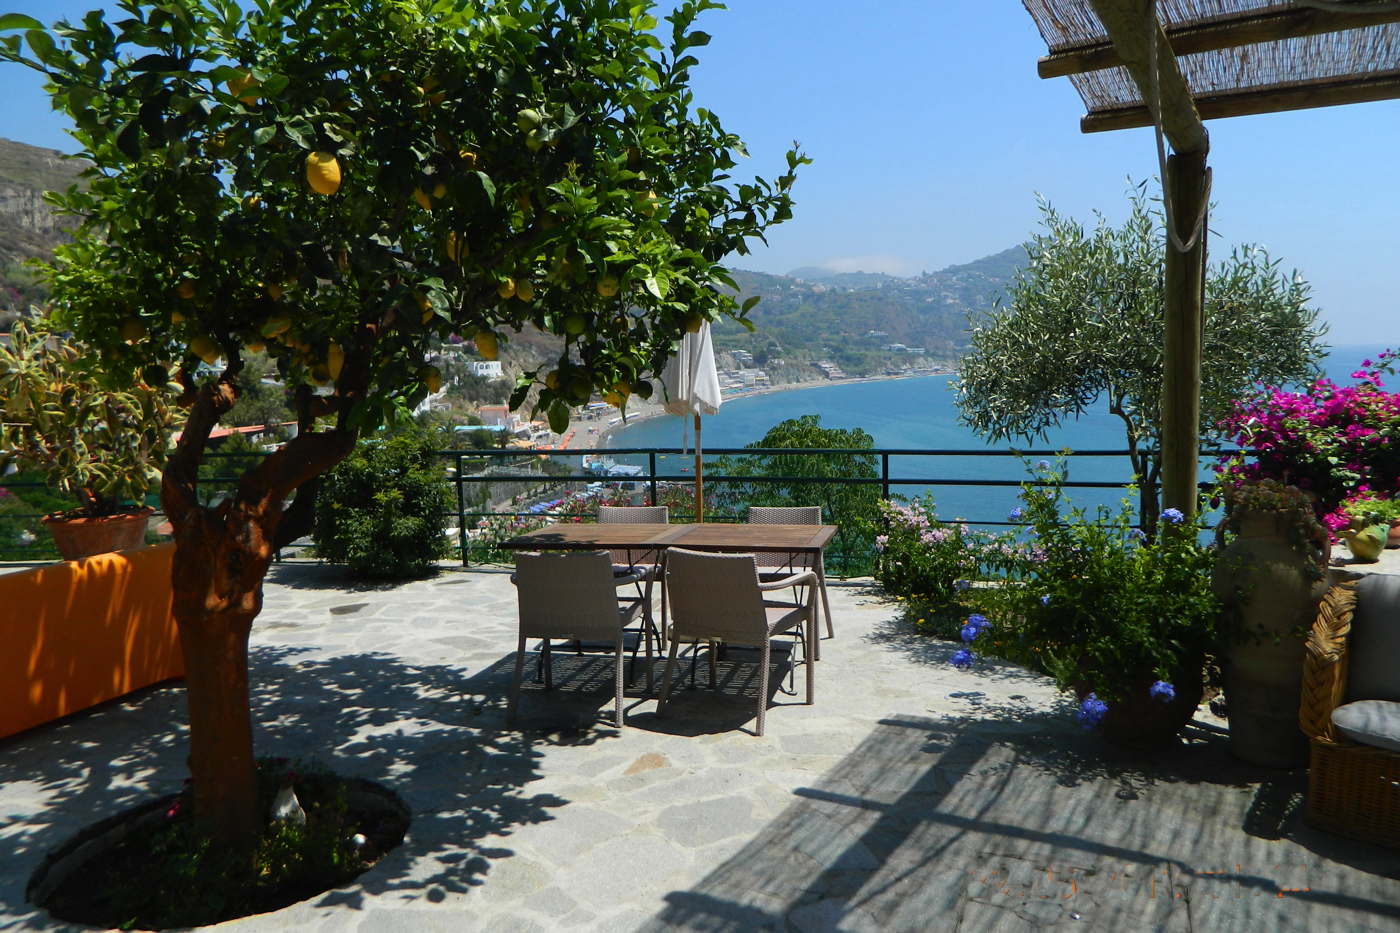 Holiday rental villa by the sea in Ischia at DOMIZILE REISEN